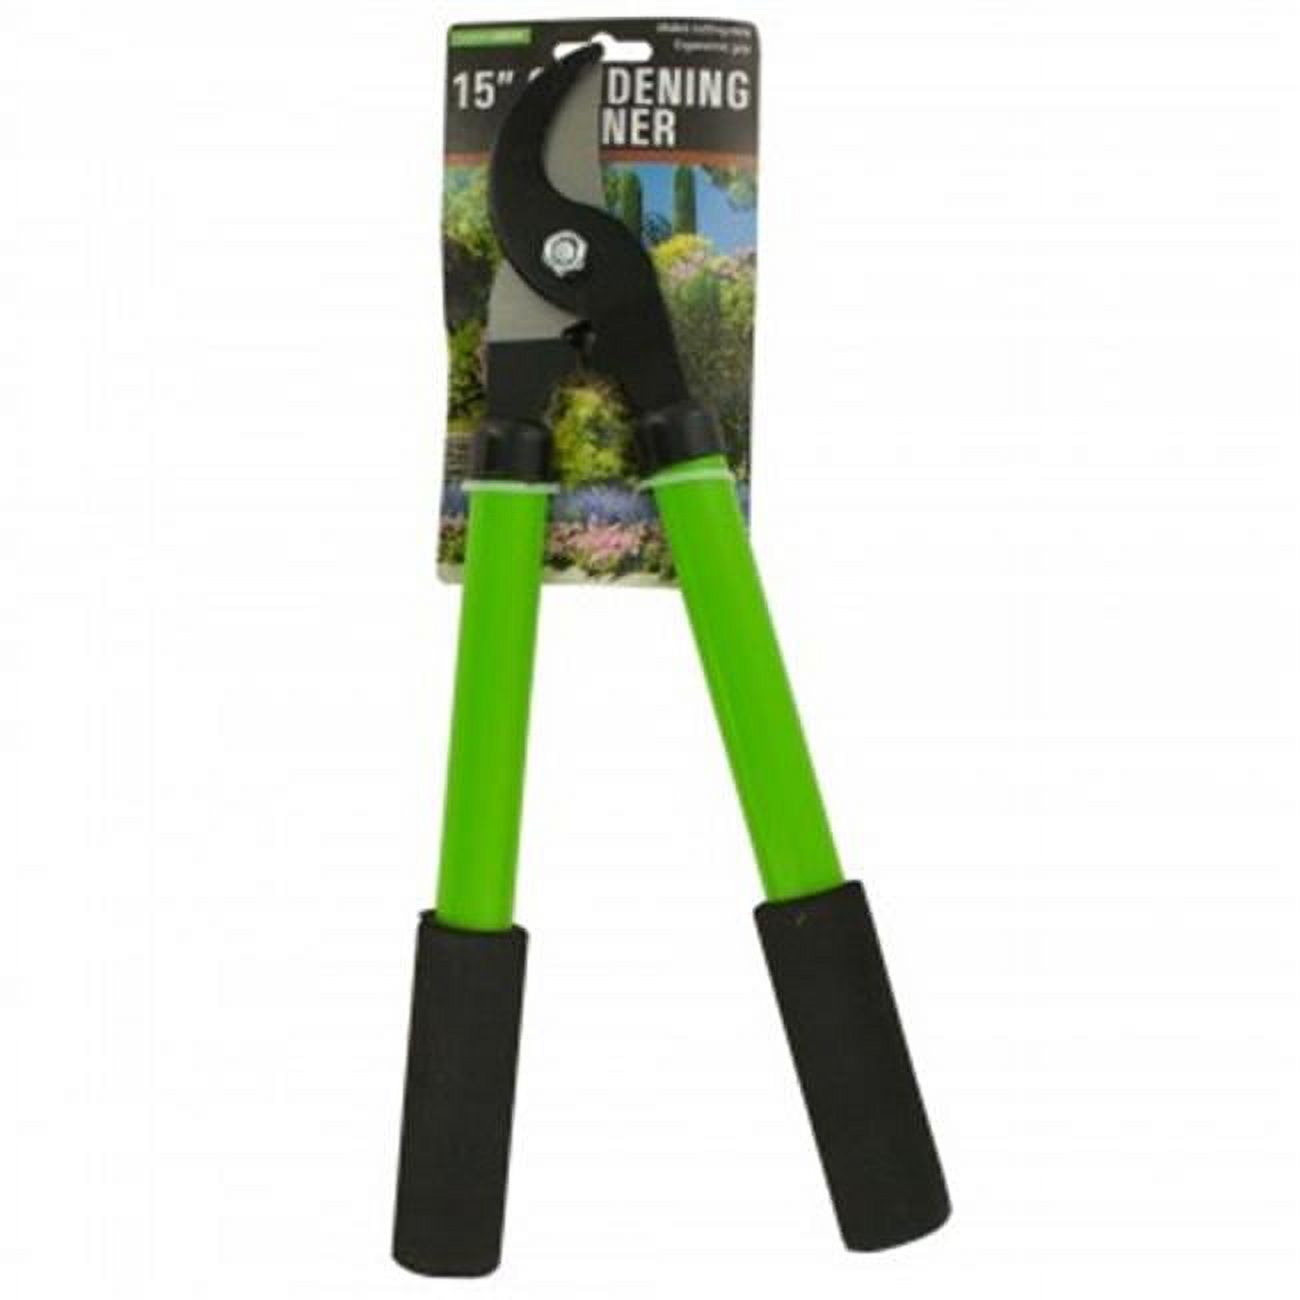 Bulk Buys OS275-16 Gardening Pruner with Foam Grips - 16 Piece -Pack of 16 - image 1 of 1